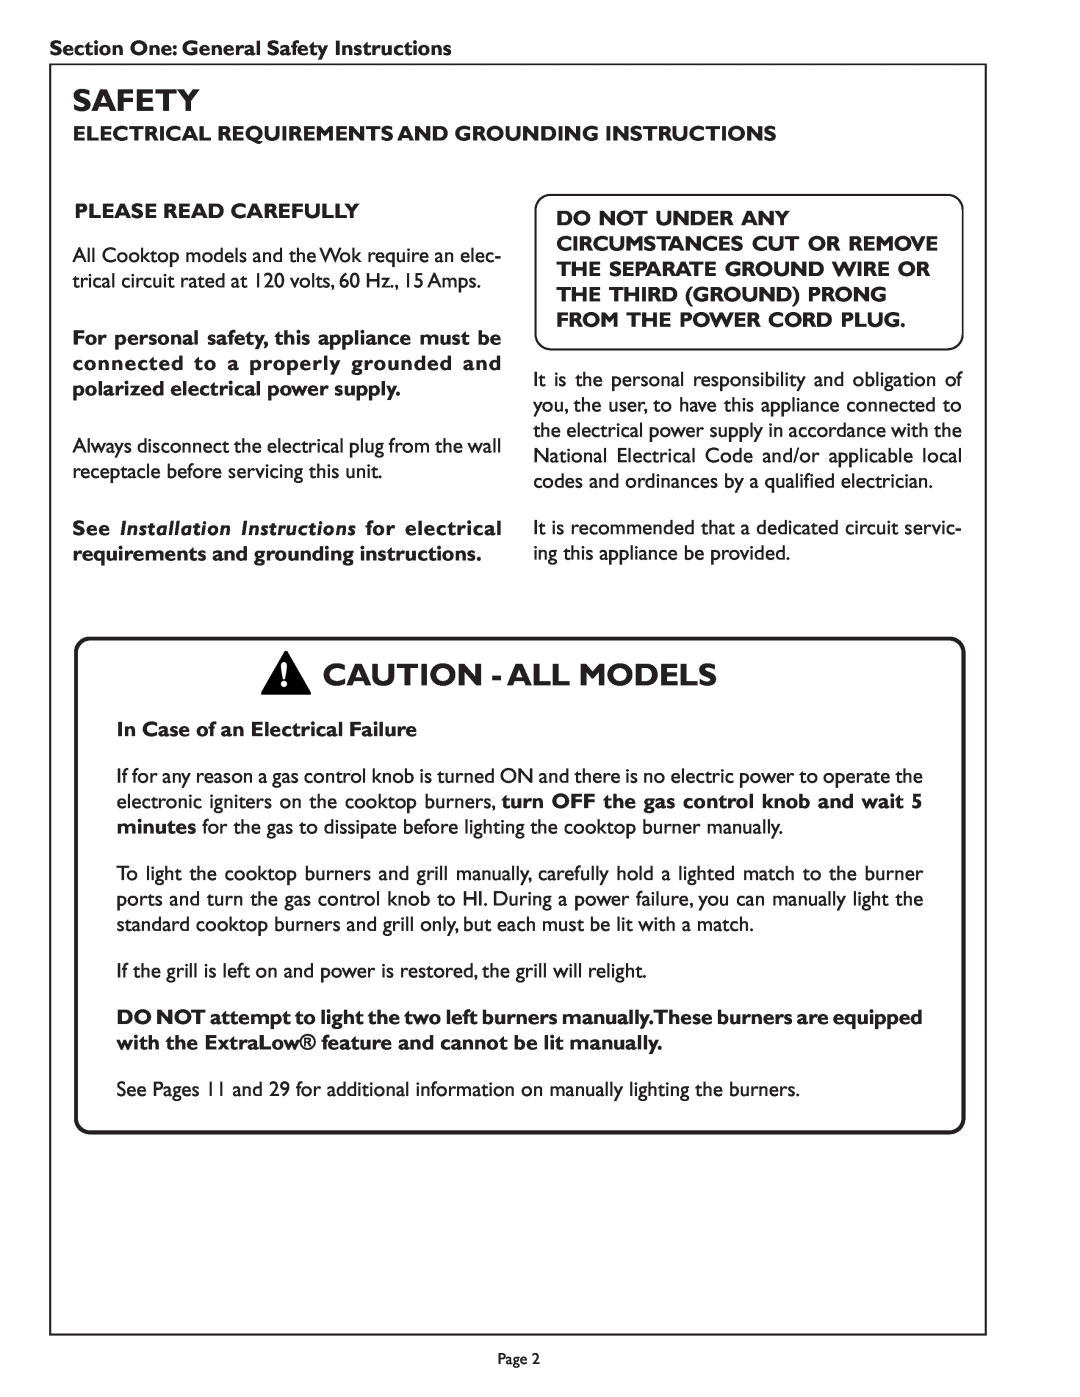 Range Kleen PSC366, PSC484GG manual Caution - All Models, Section One General Safety Instructions, Please Read Carefully 